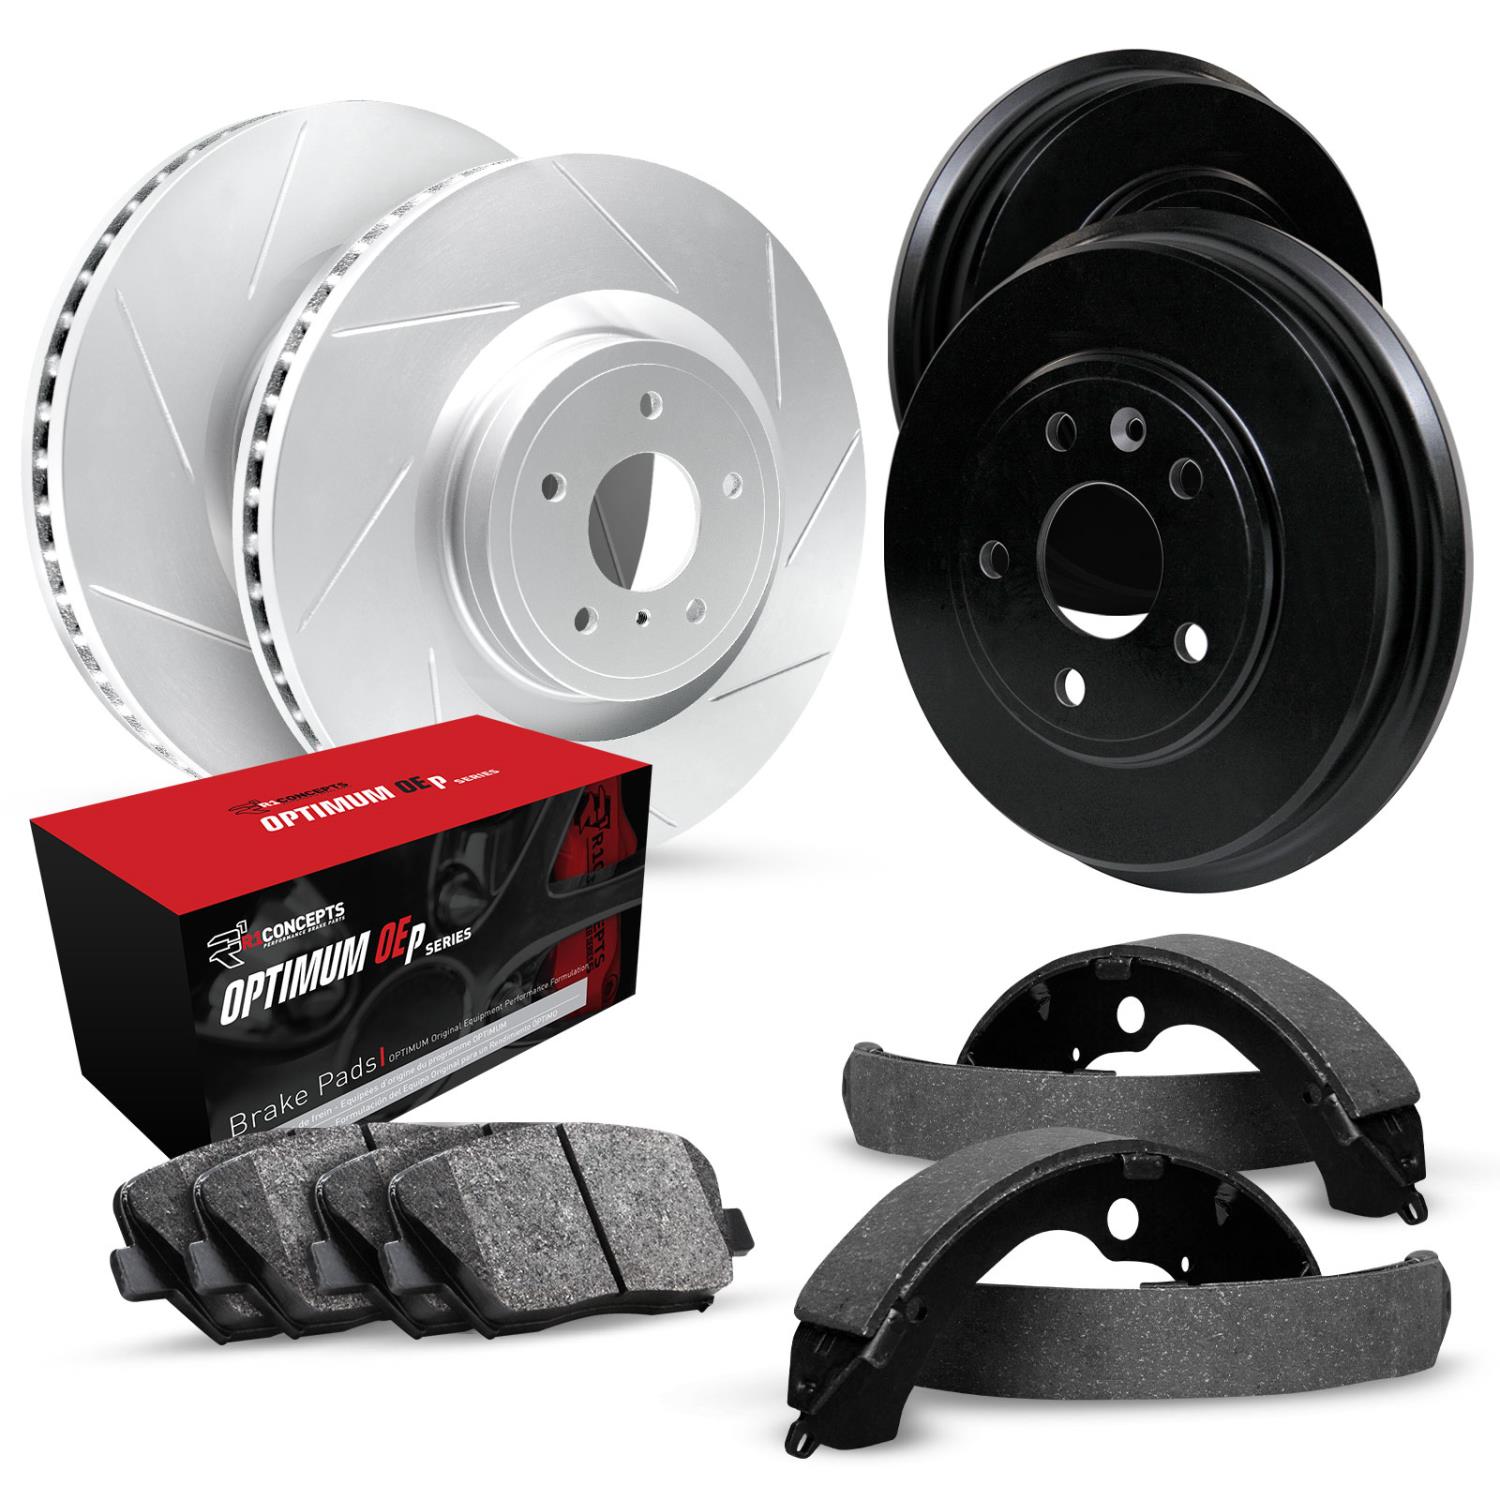 GEO-Carbon Slotted Brake Rotor & Drum Set w/Optimum OE Pads & Shoes, 1967-1968 GM, Position: Front & Rear